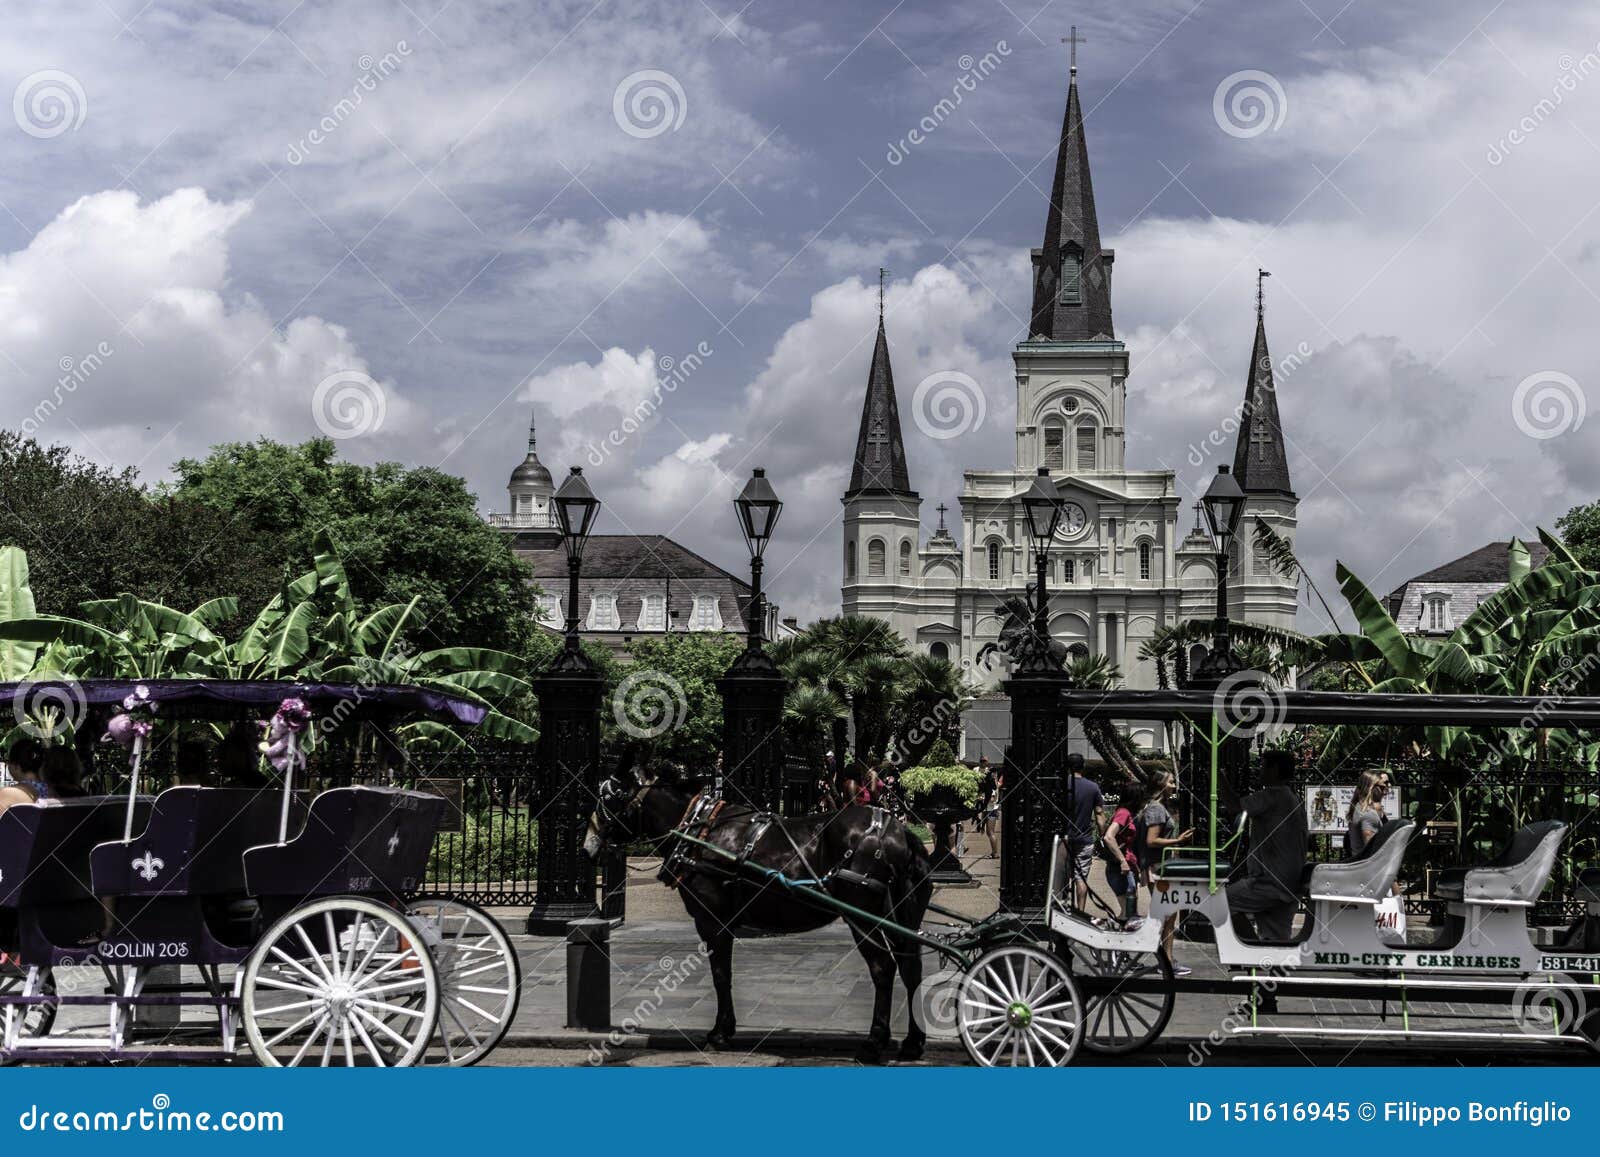 St Louis Cathedral New Orleans French Quarter, Decatur Street Editorial Image - Image of louinew ...